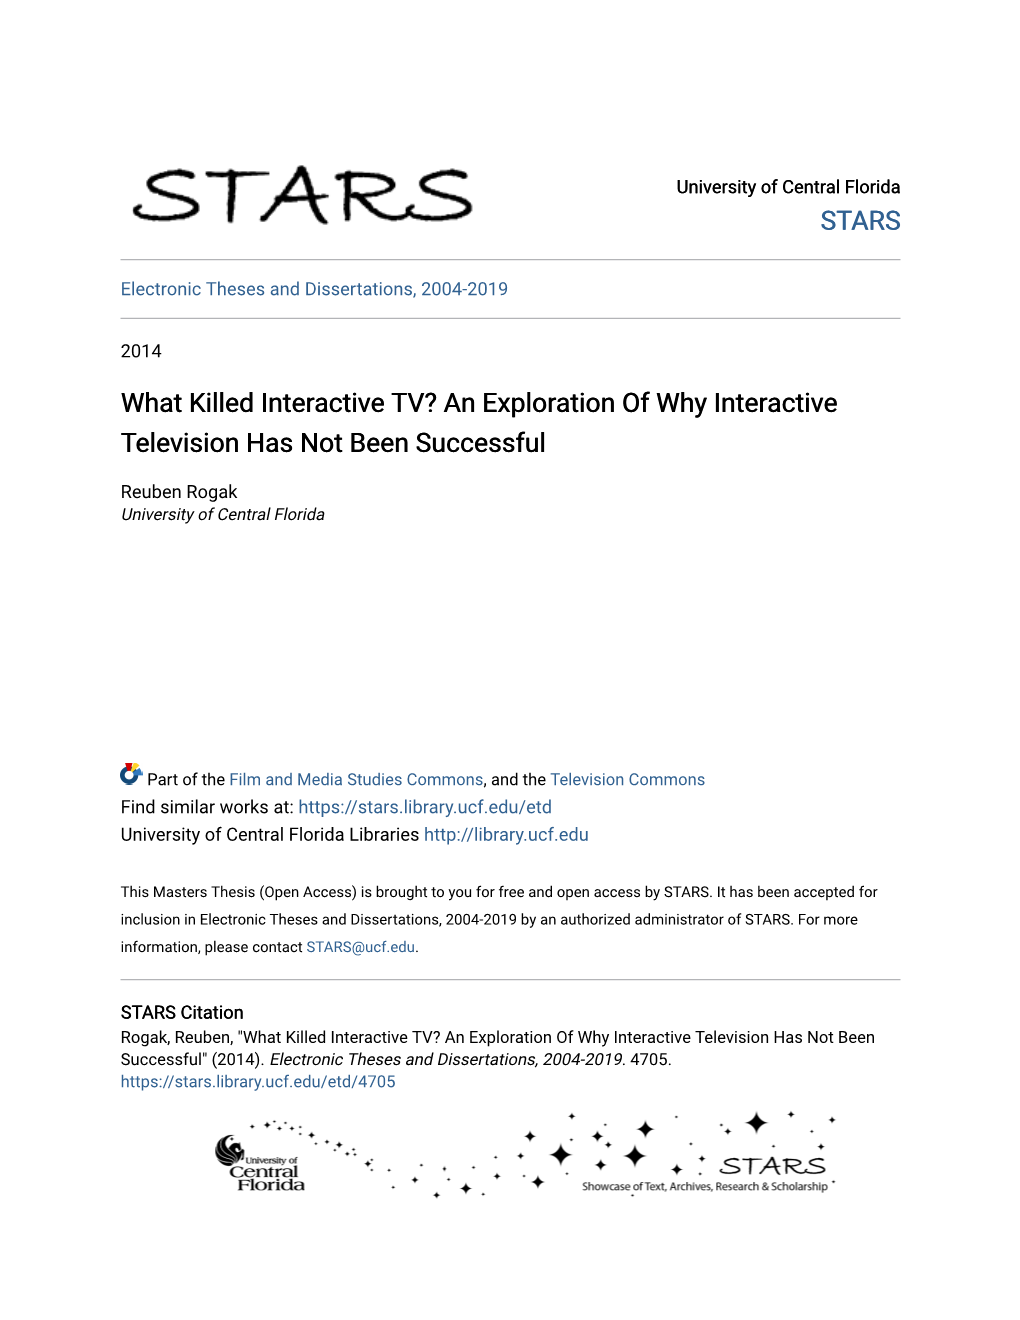 What Killed Interactive TV? an Exploration of Why Interactive Television Has Not Been Successful